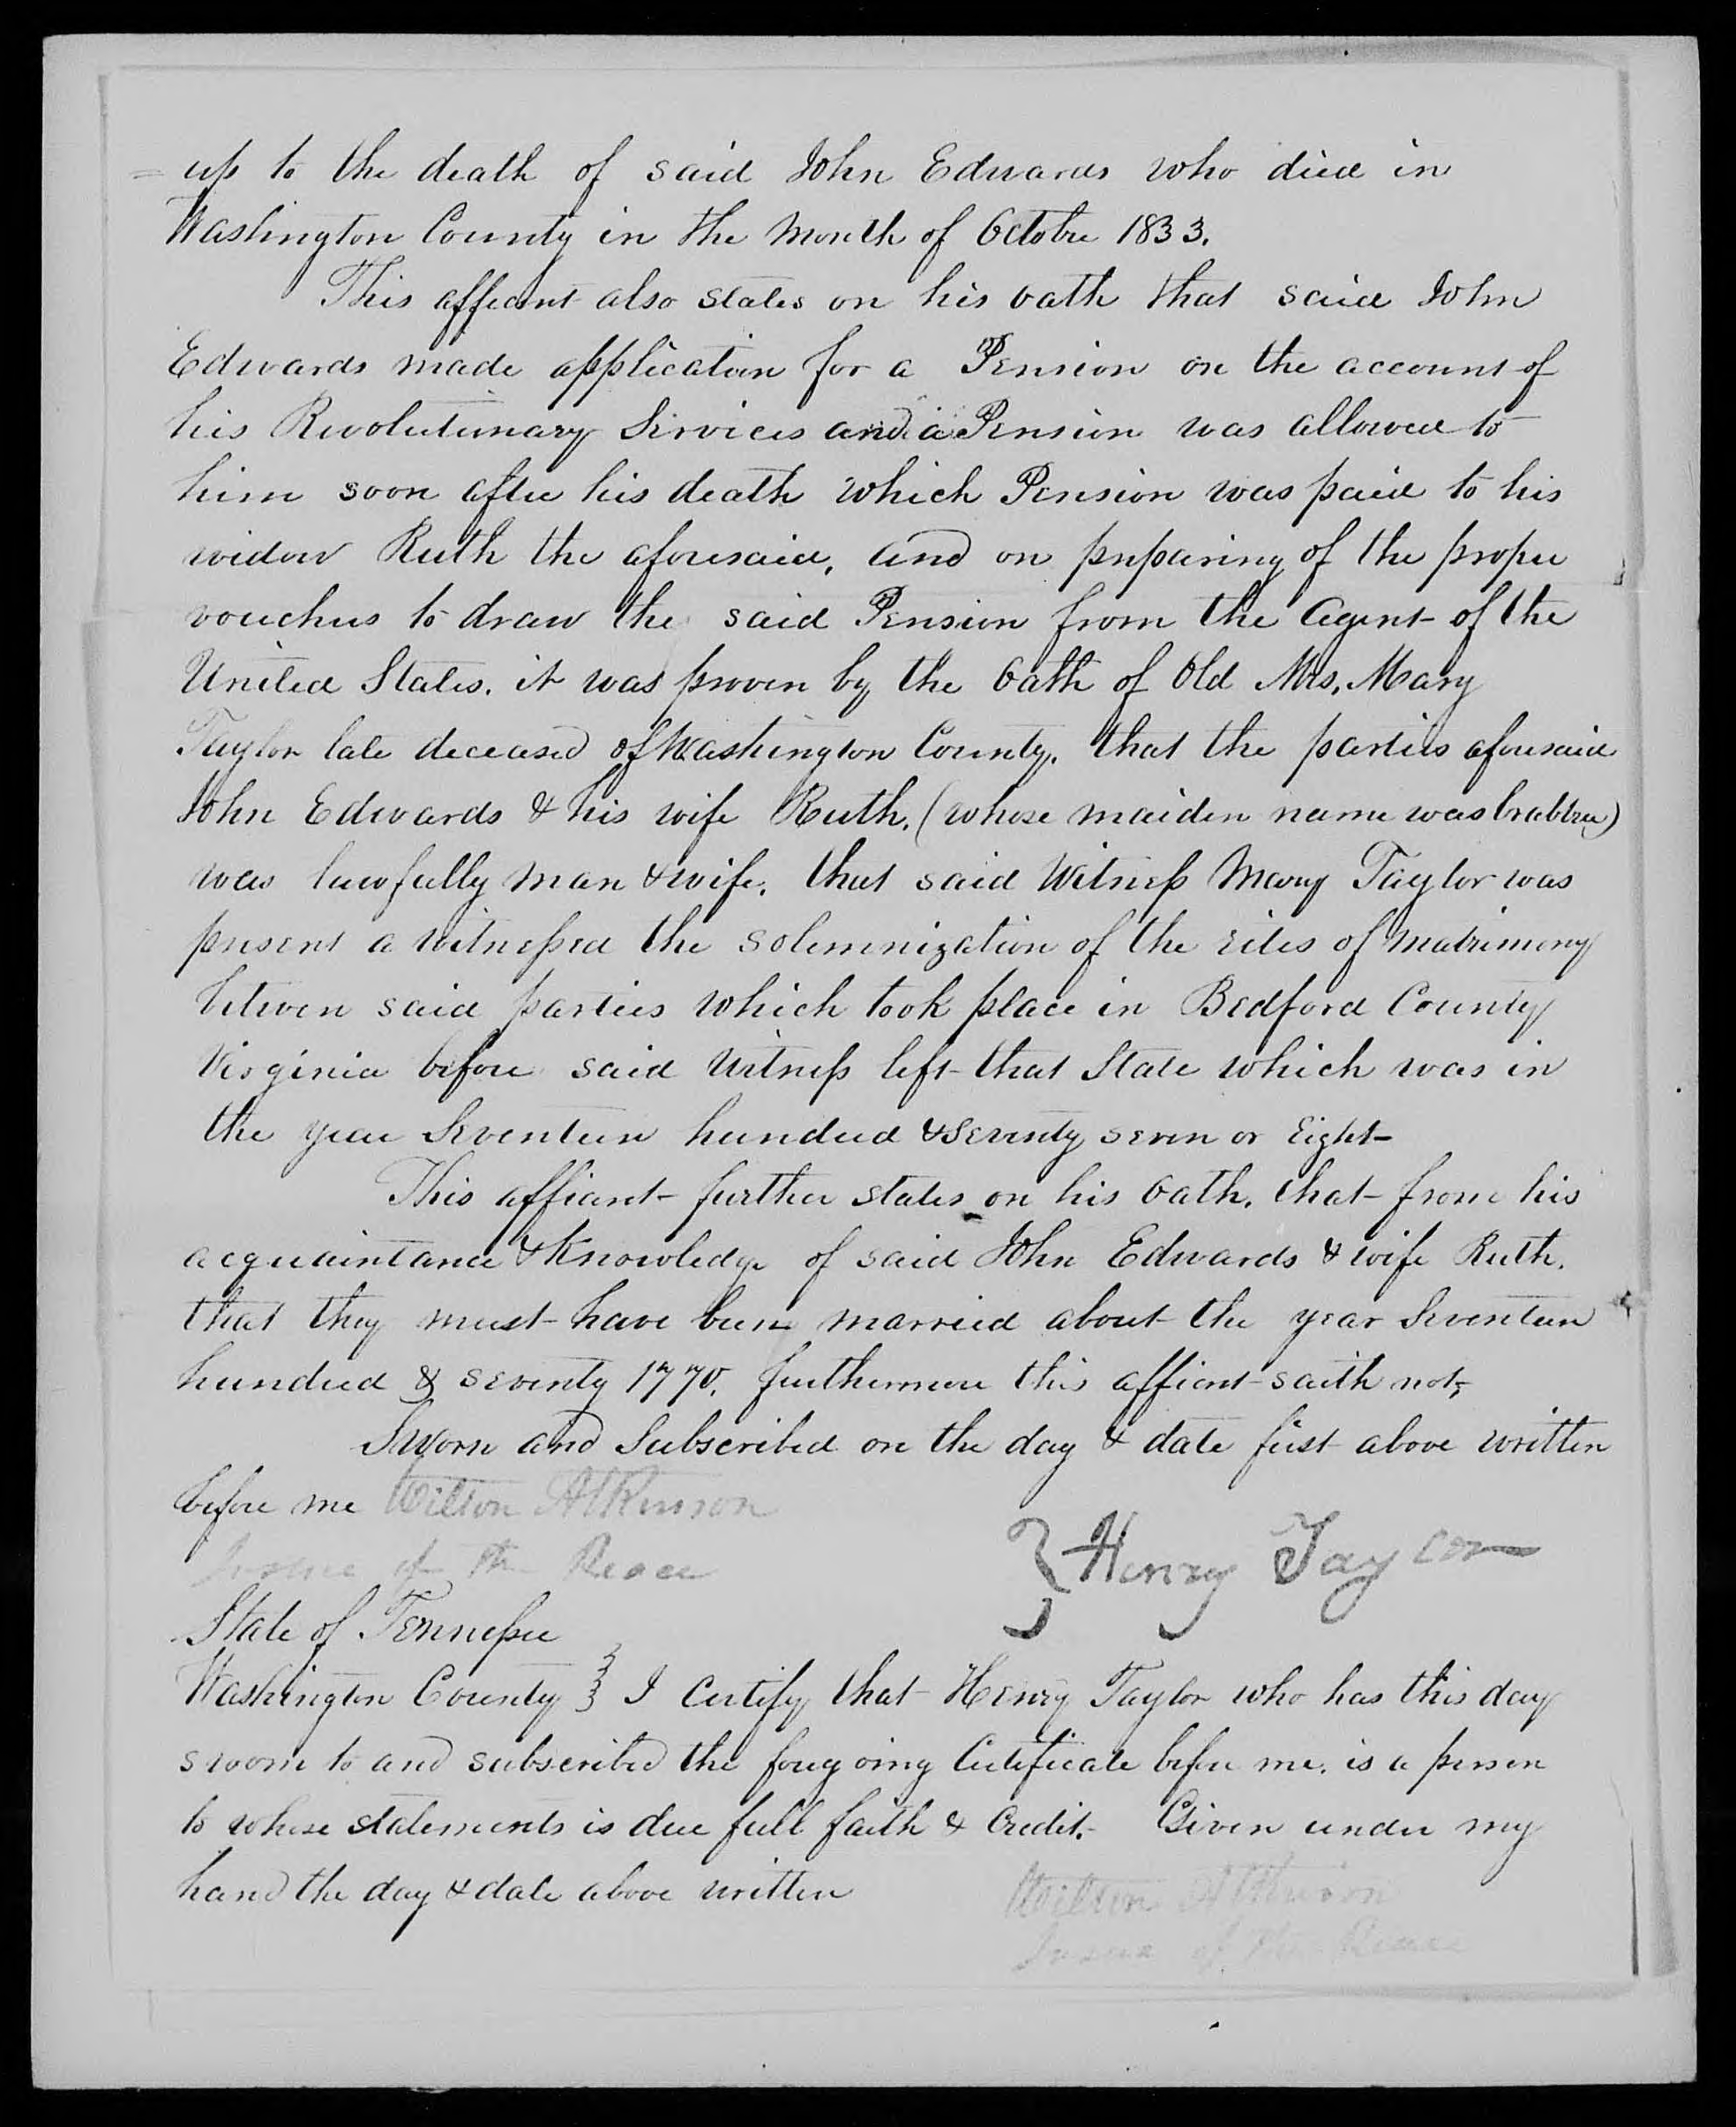 Affidavit of Henry Taylor in support of a Pension Claim for Ruth Edwards, 7 March 1844, page 2